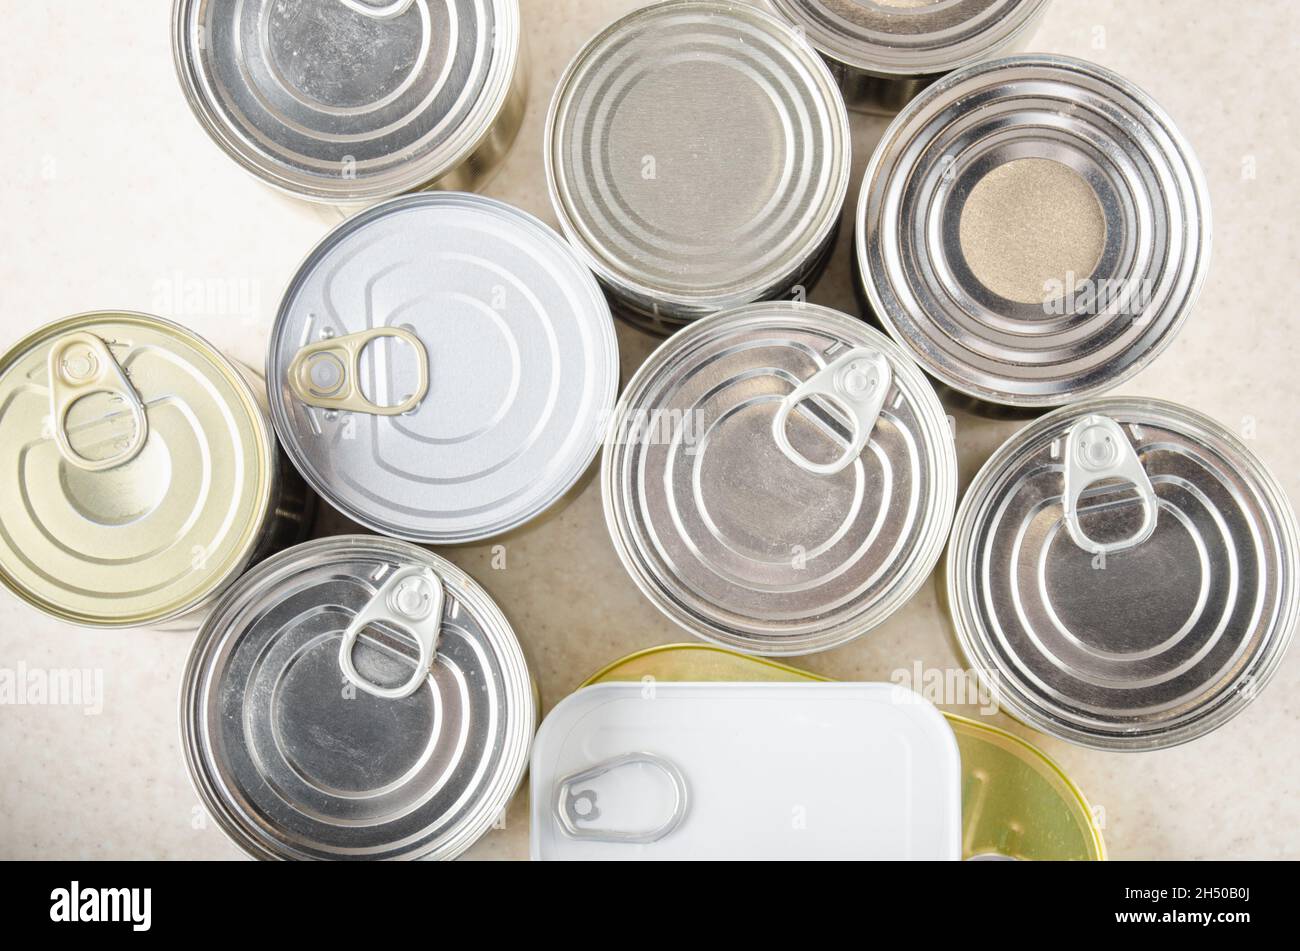 Flat lay view at various canned foods in tin cans on kitchen table, non-perishable, long shelf life food for survival in emergency conditions concept Stock Photo